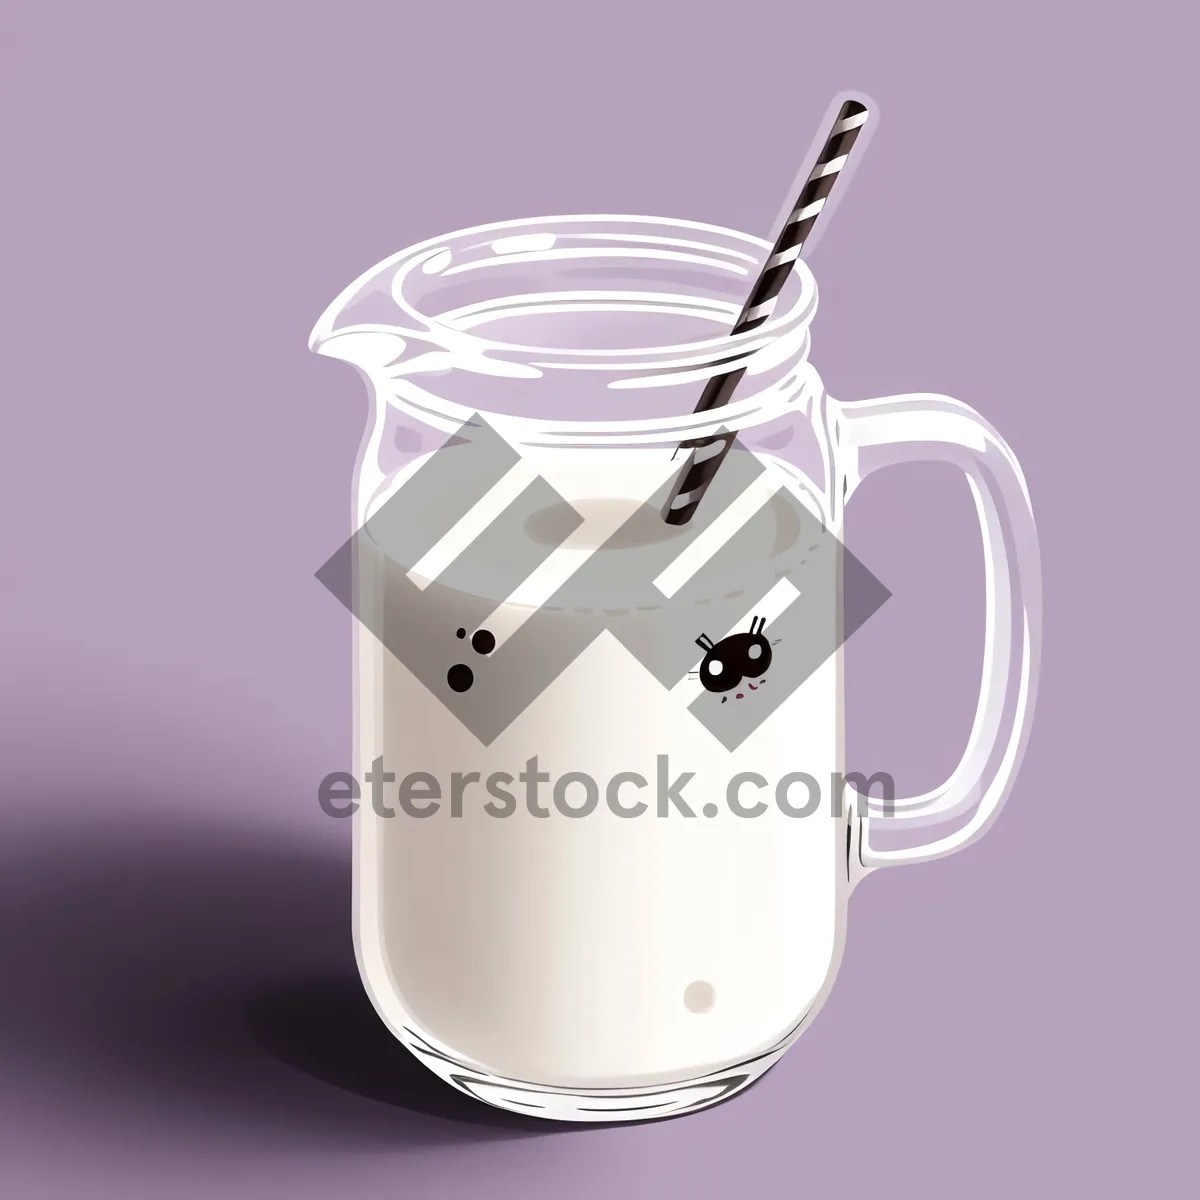 Picture of Morning Drink: Hot Tea in Glass Mug